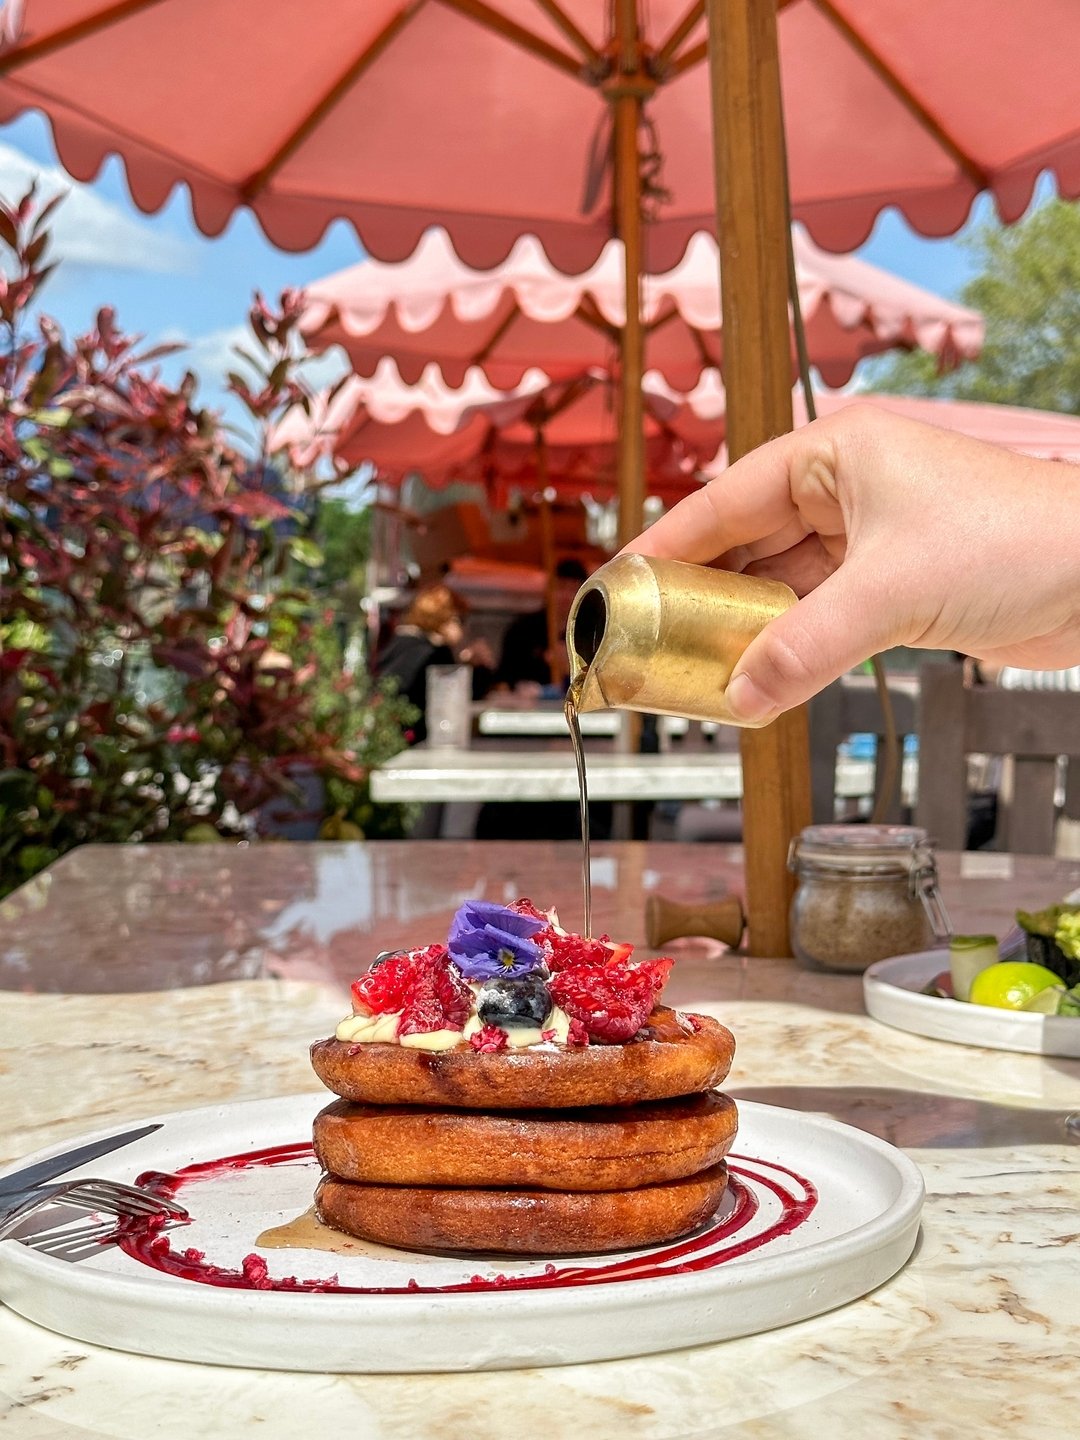 Sunday mornings complete with blueberry buttermilk pancake stack.🤩🥞⁣ Make them extra fluffy with lots of berries and drenched in plenty of maple syrup.🫐🍌💗​​​​​​​​​

A reminder that we serve our award-winning brunch 7 days a week across our sites